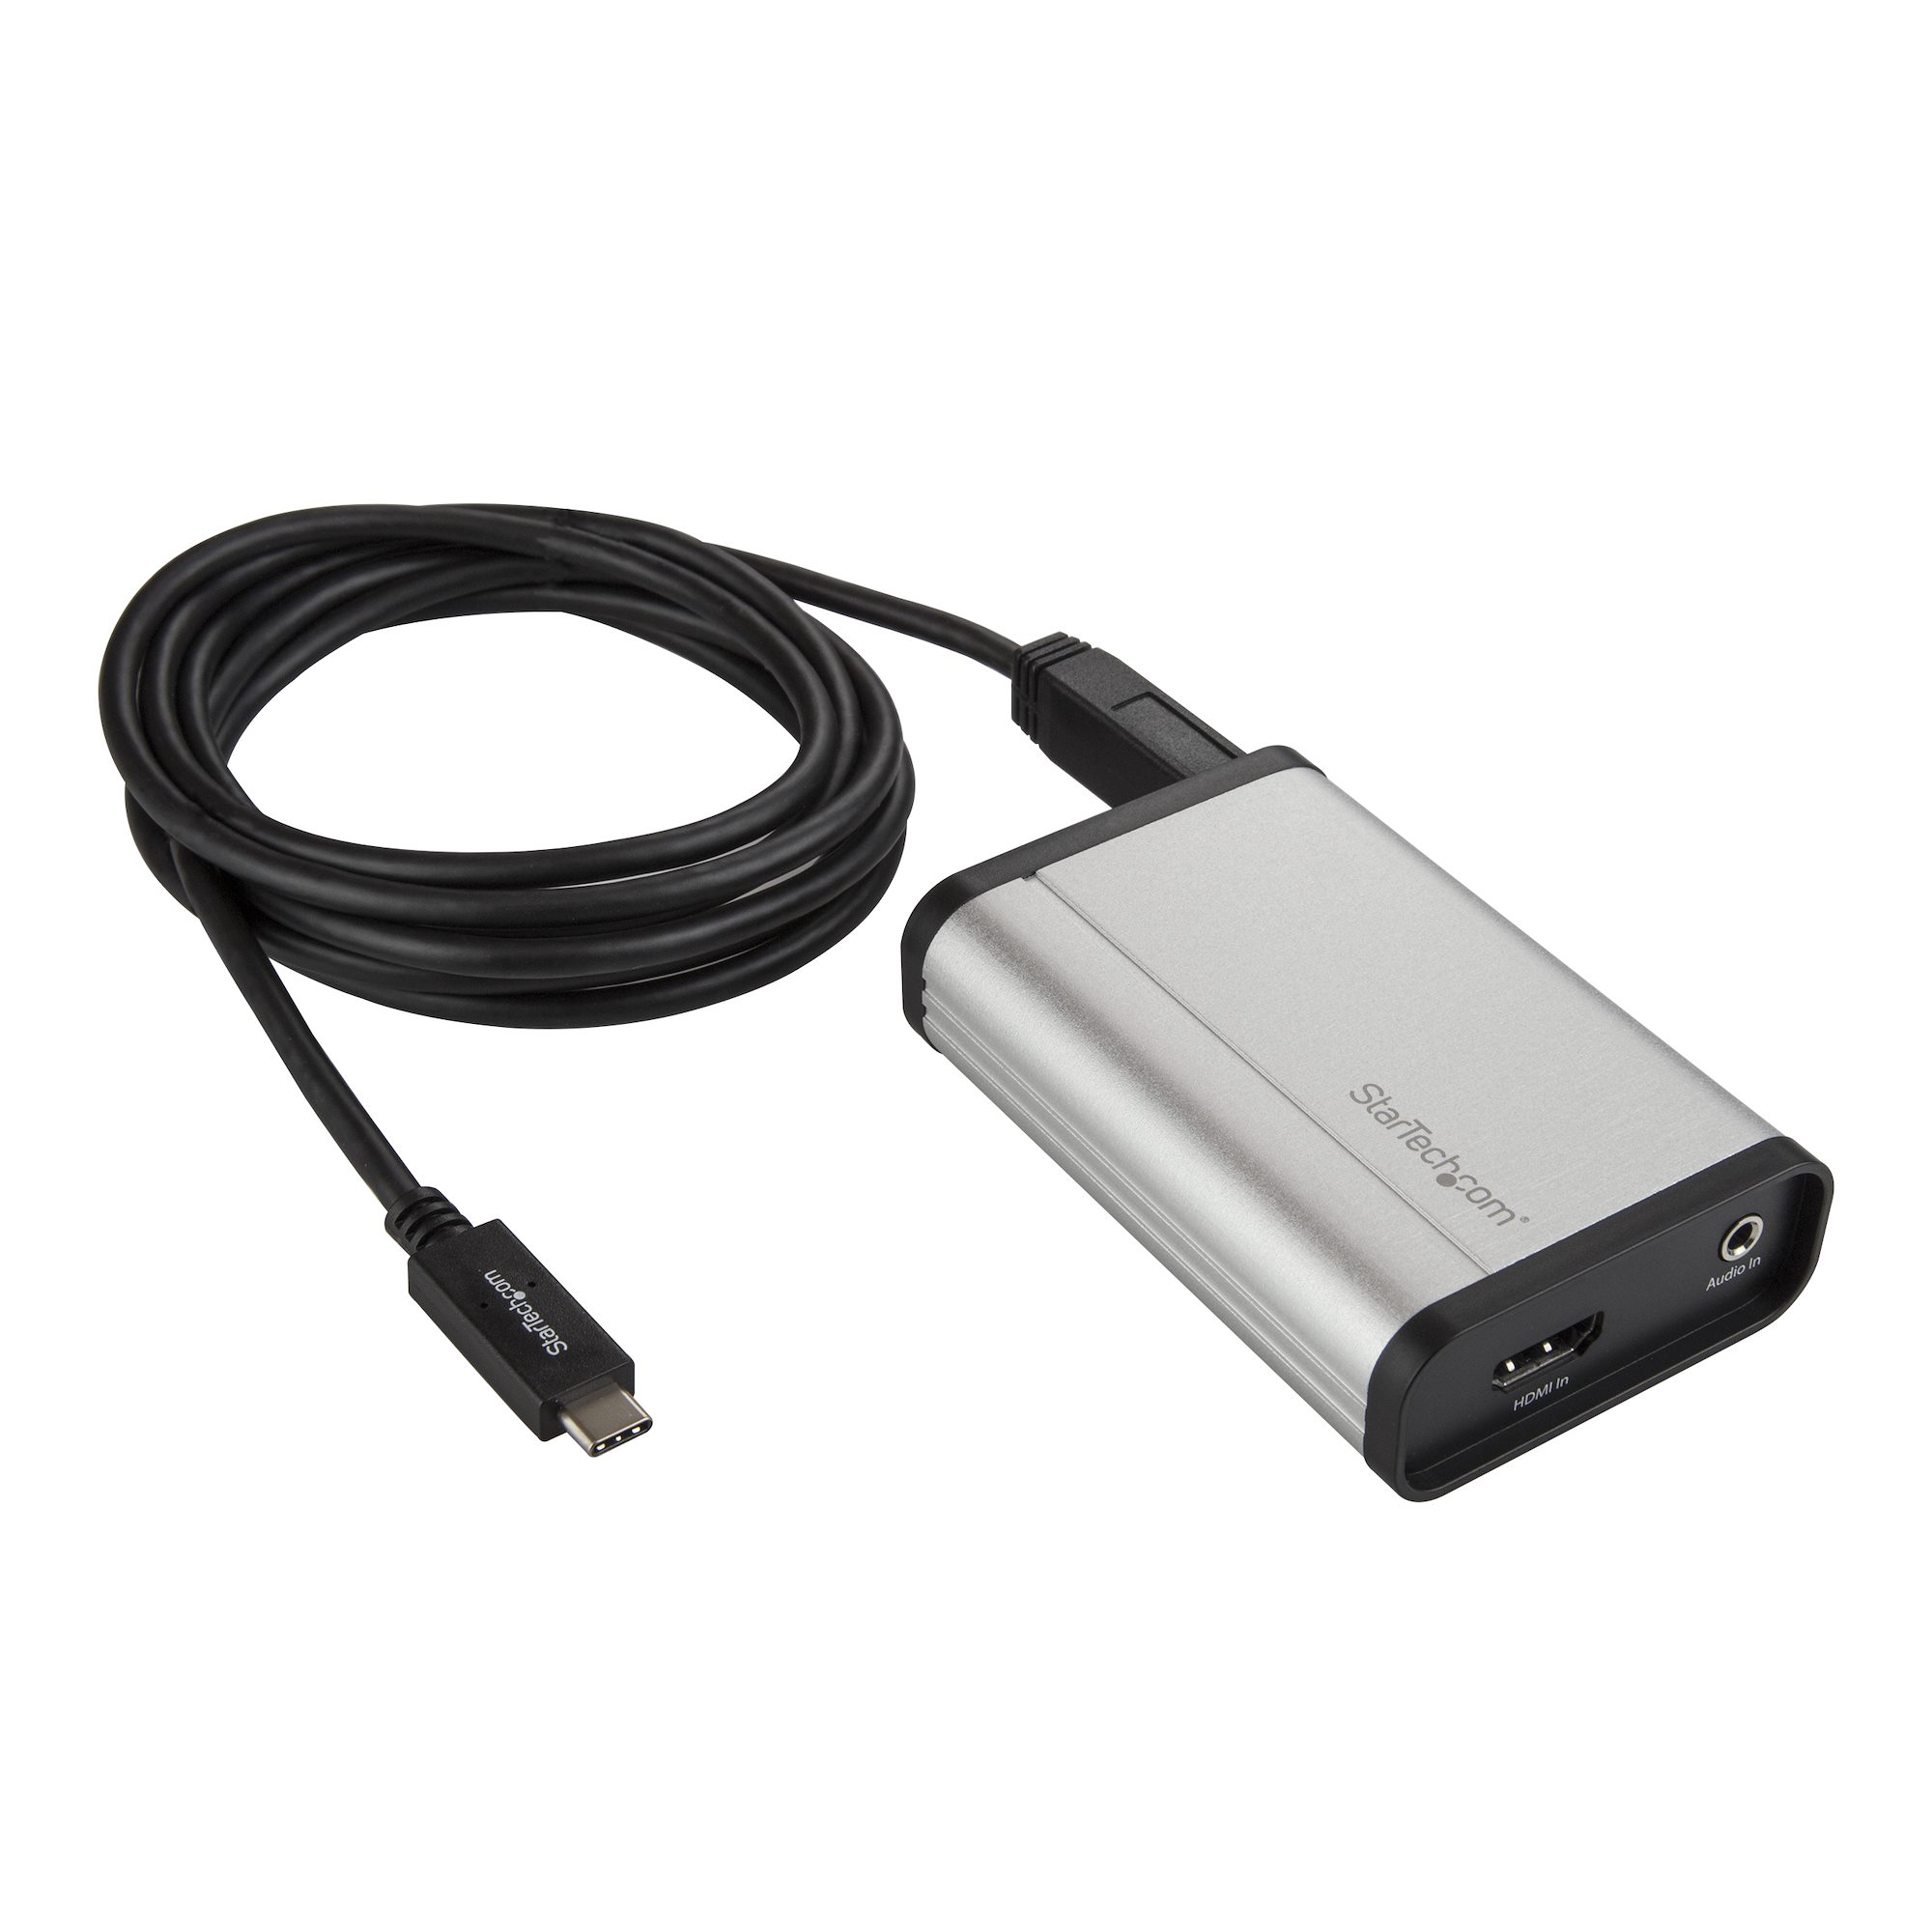 HDMI to USB Video Device - Video Converters |